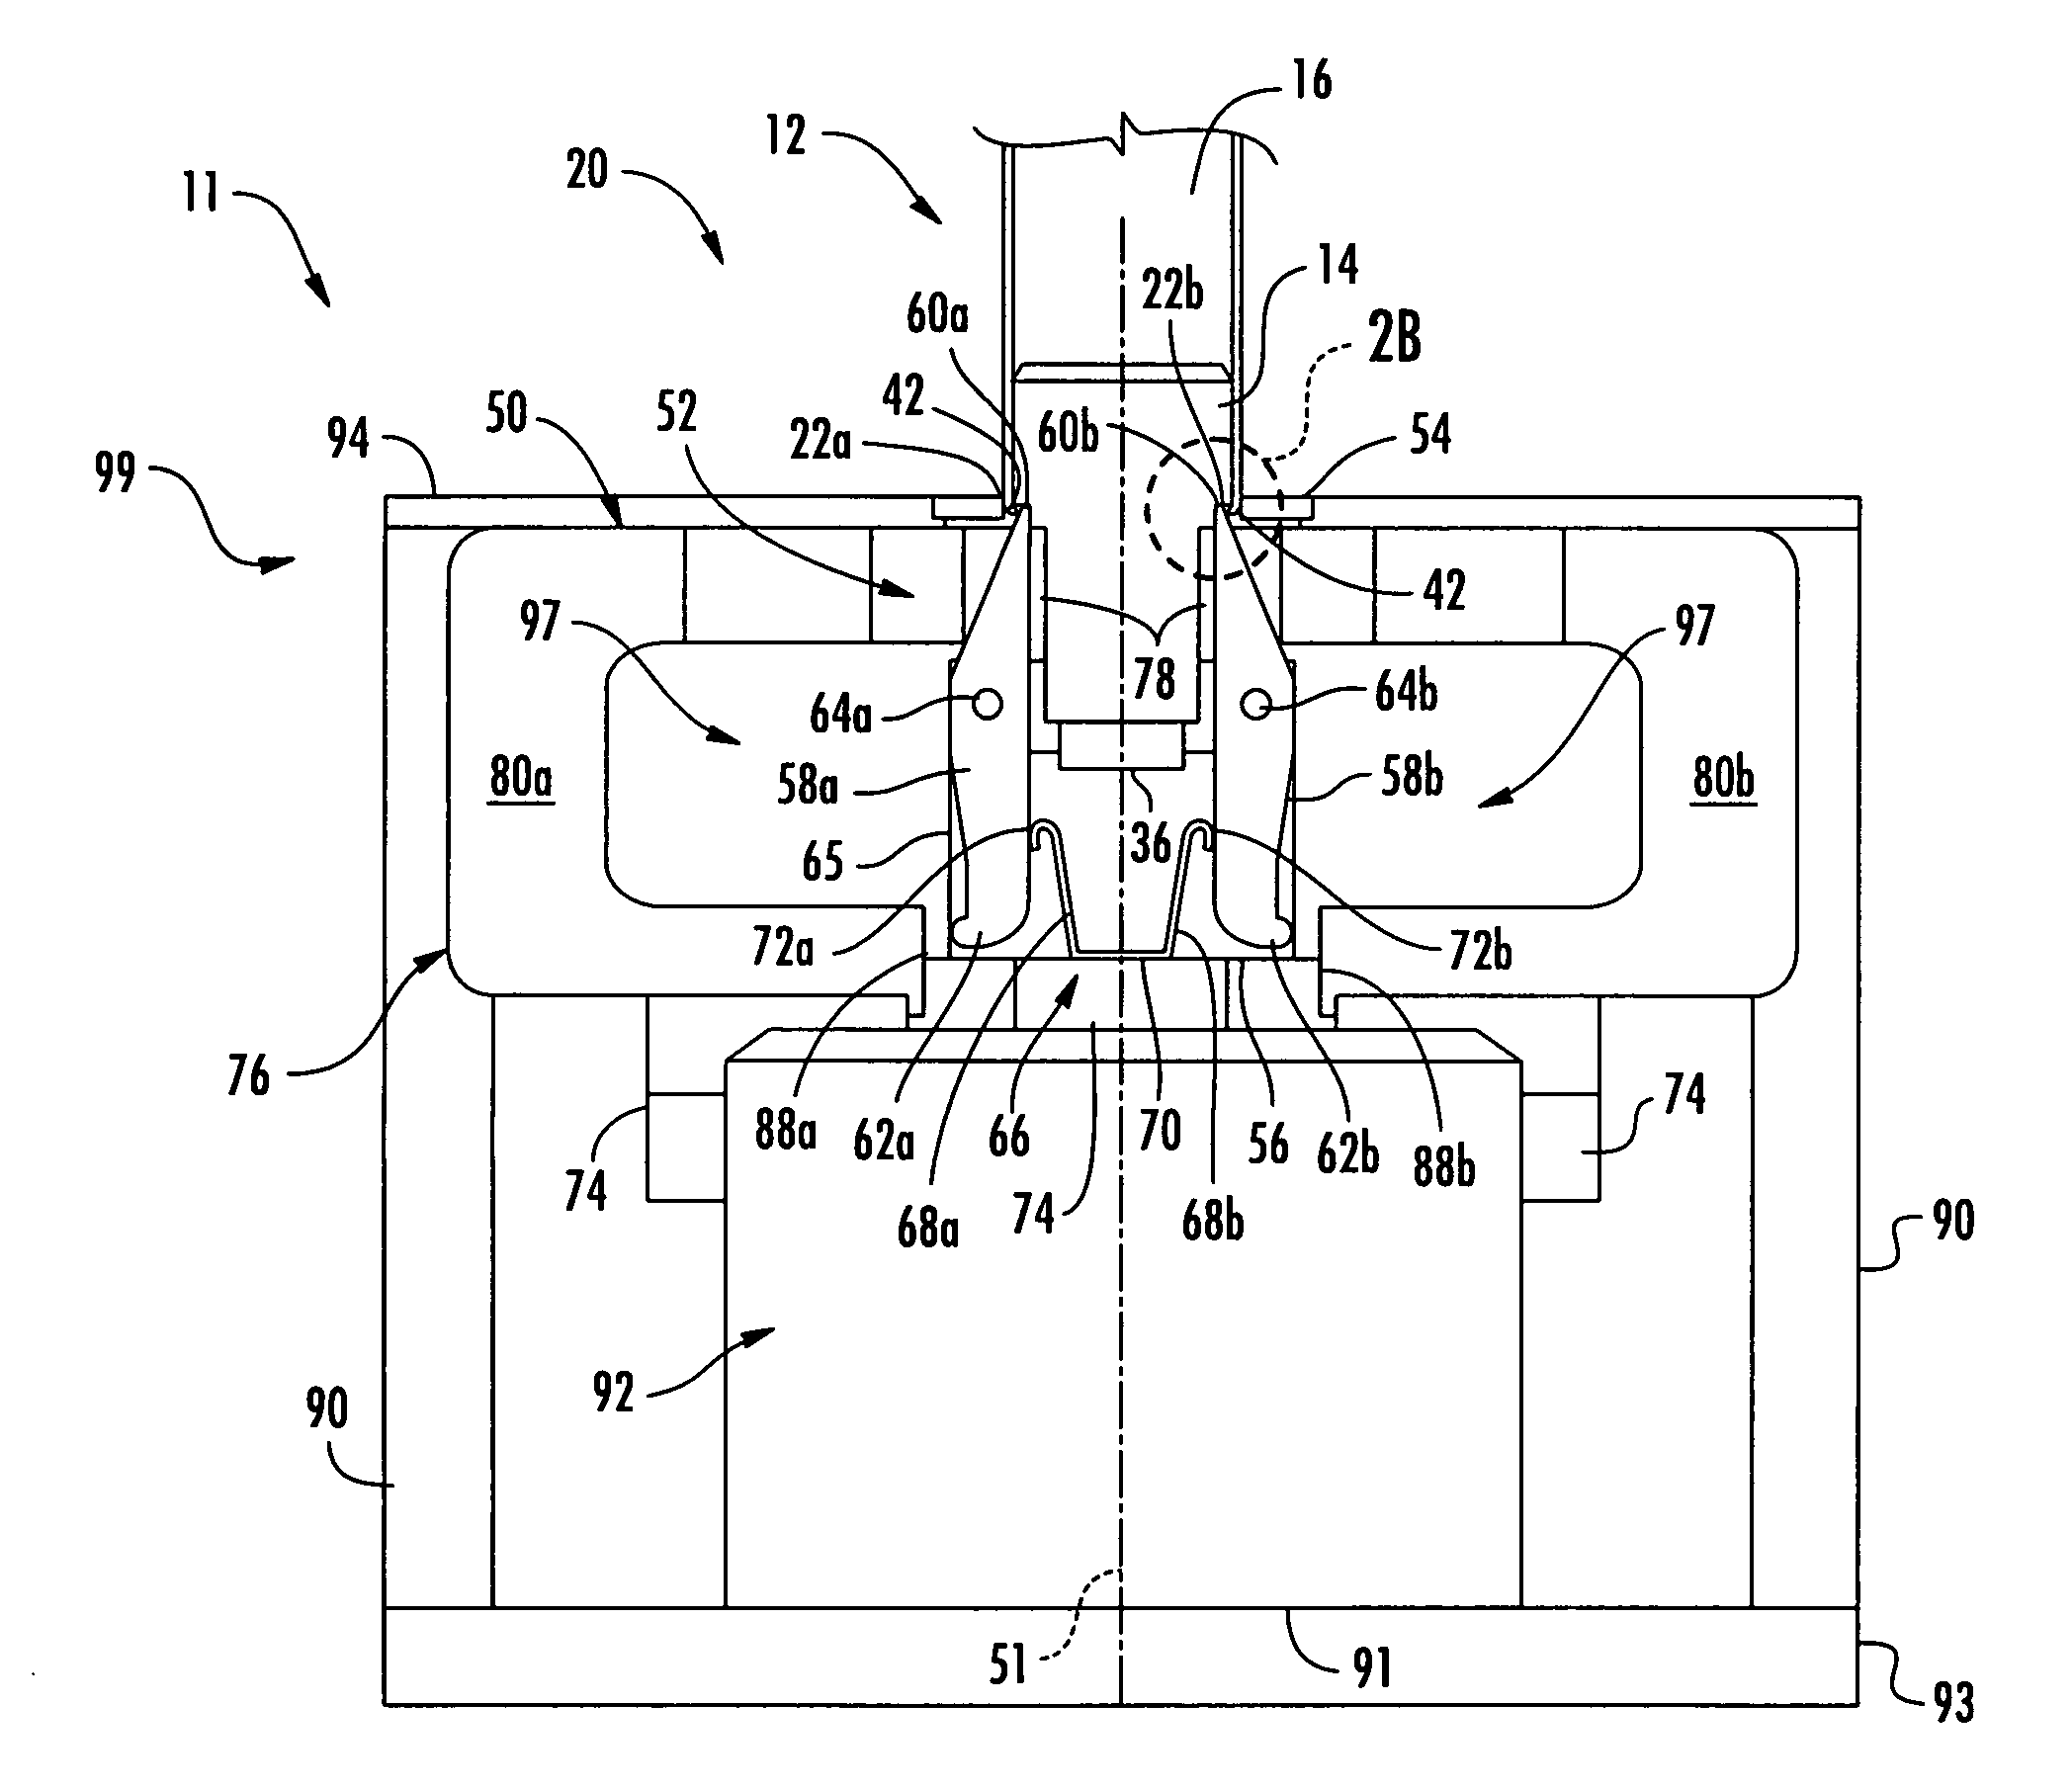 Methods and devices for remanufacturing printer cartridge components